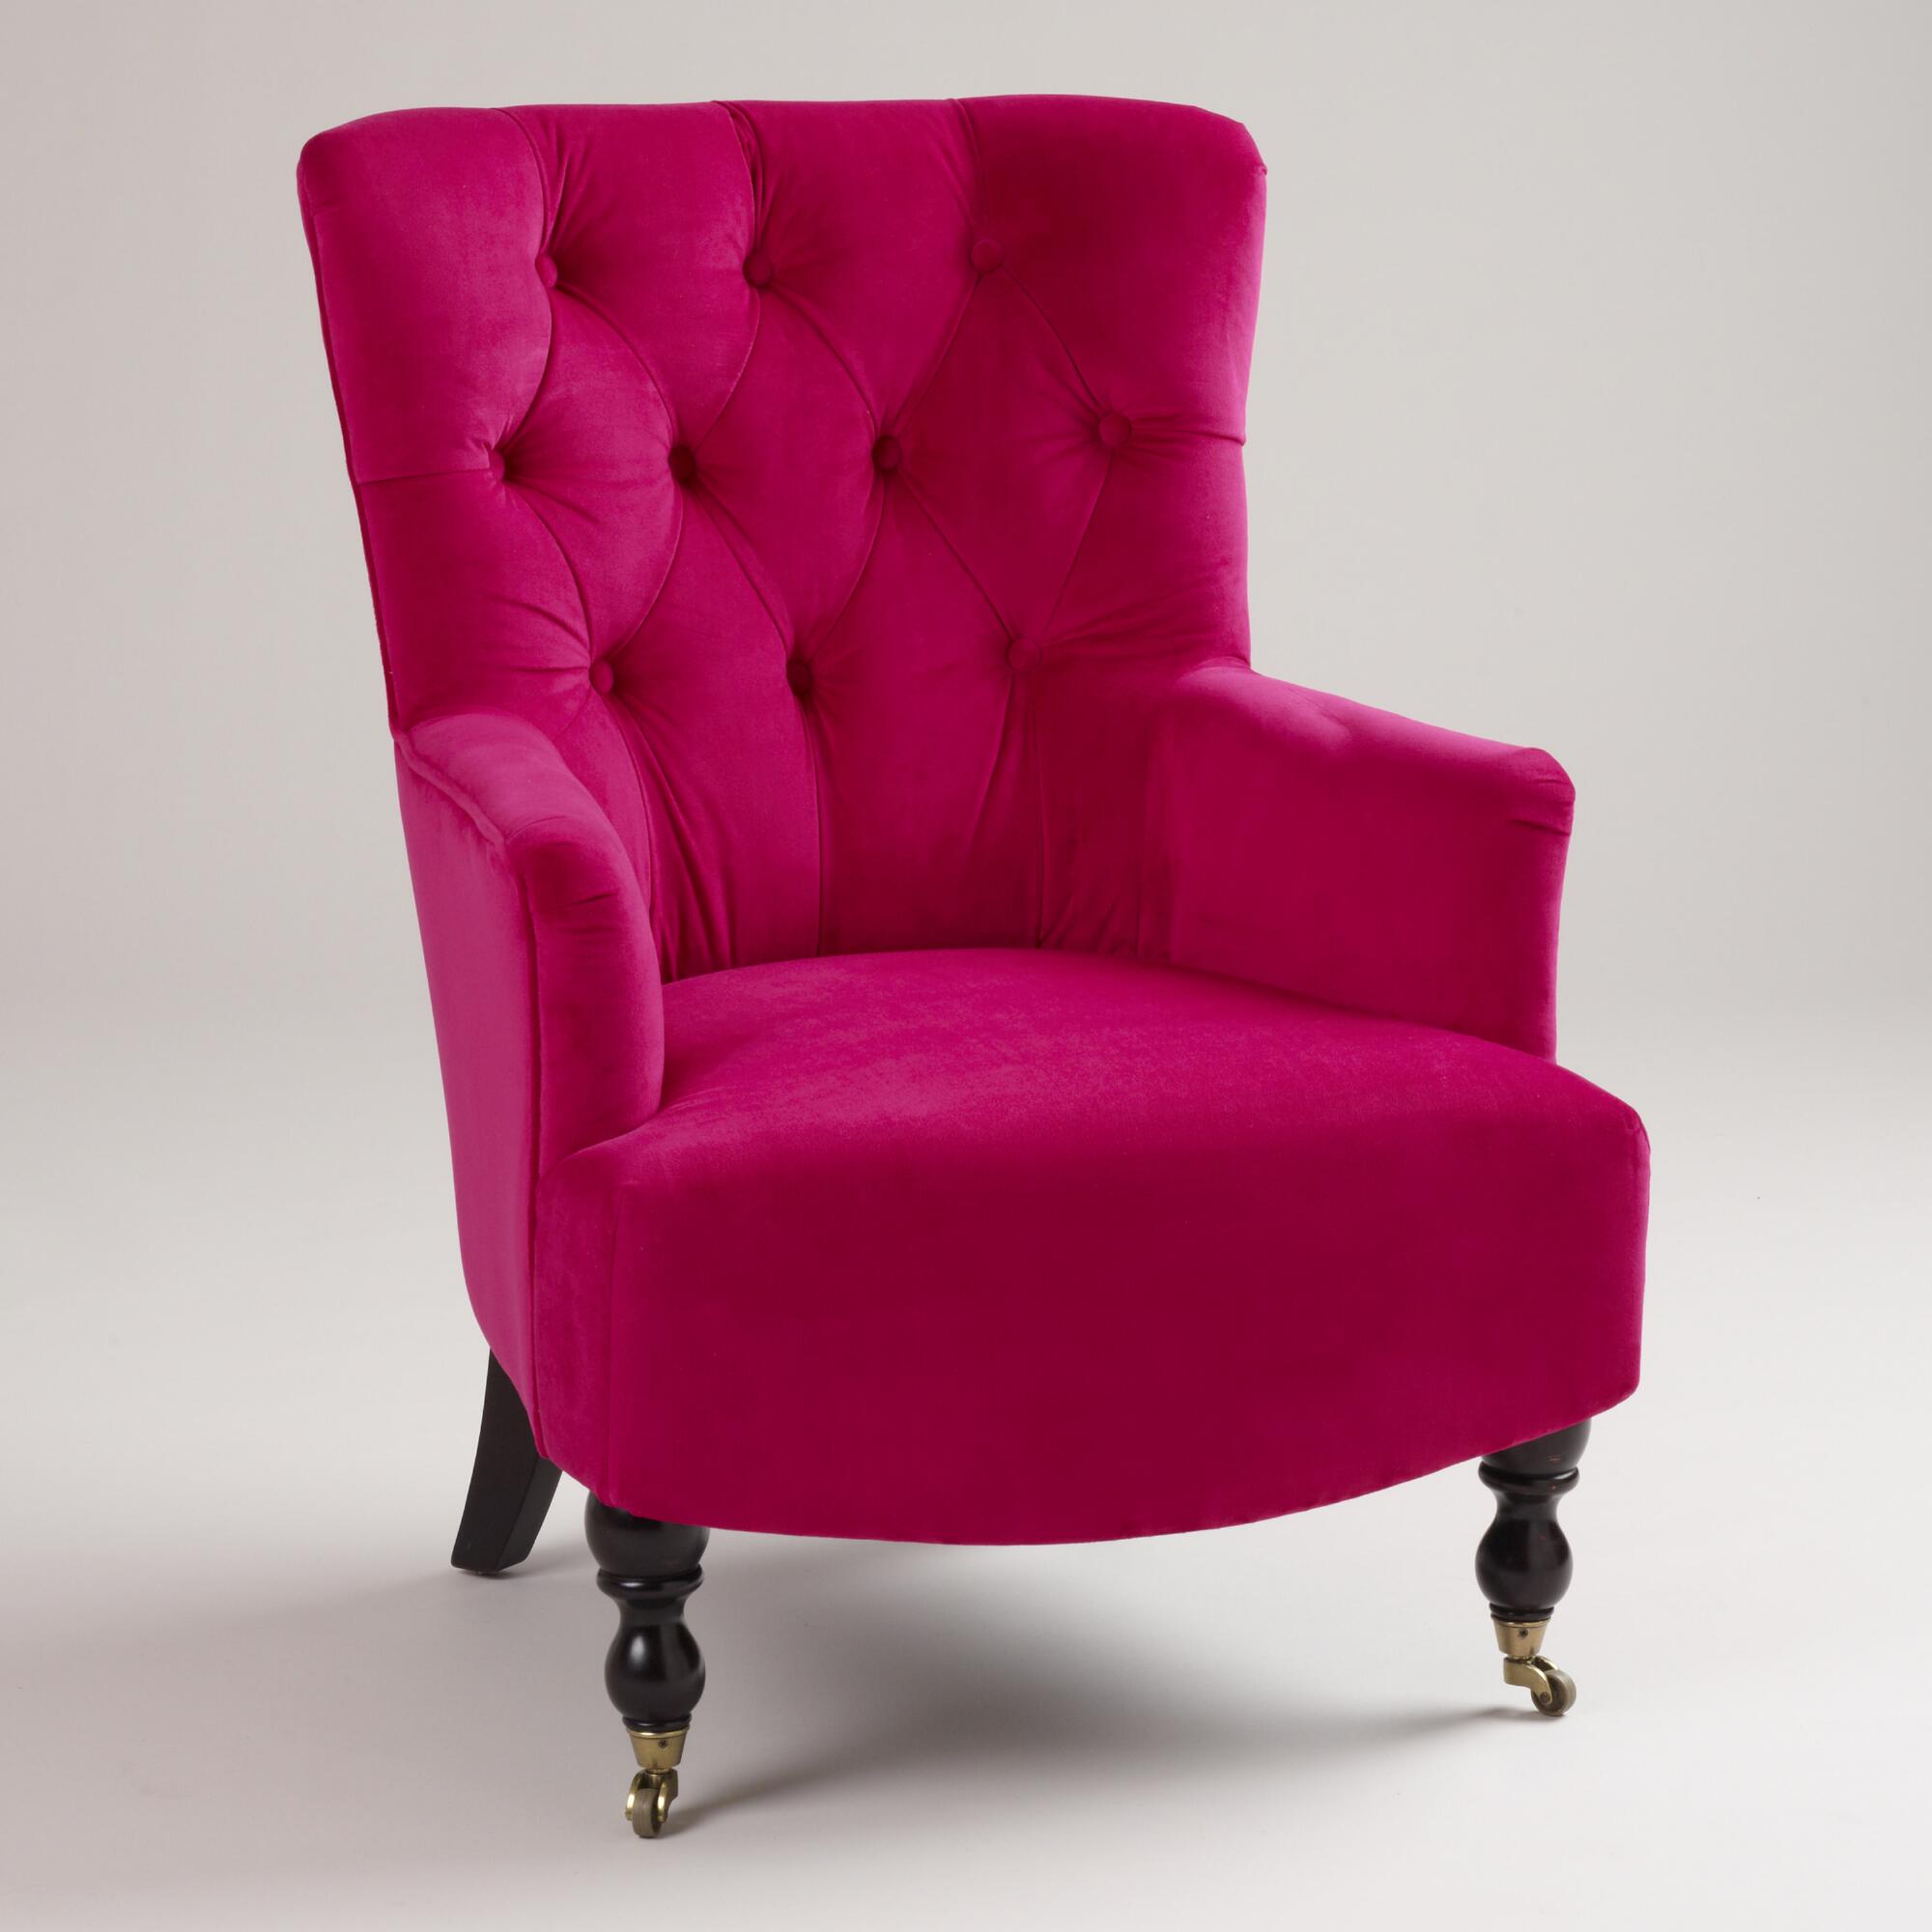 The Look for Less - Fuchsia Wing Chairs